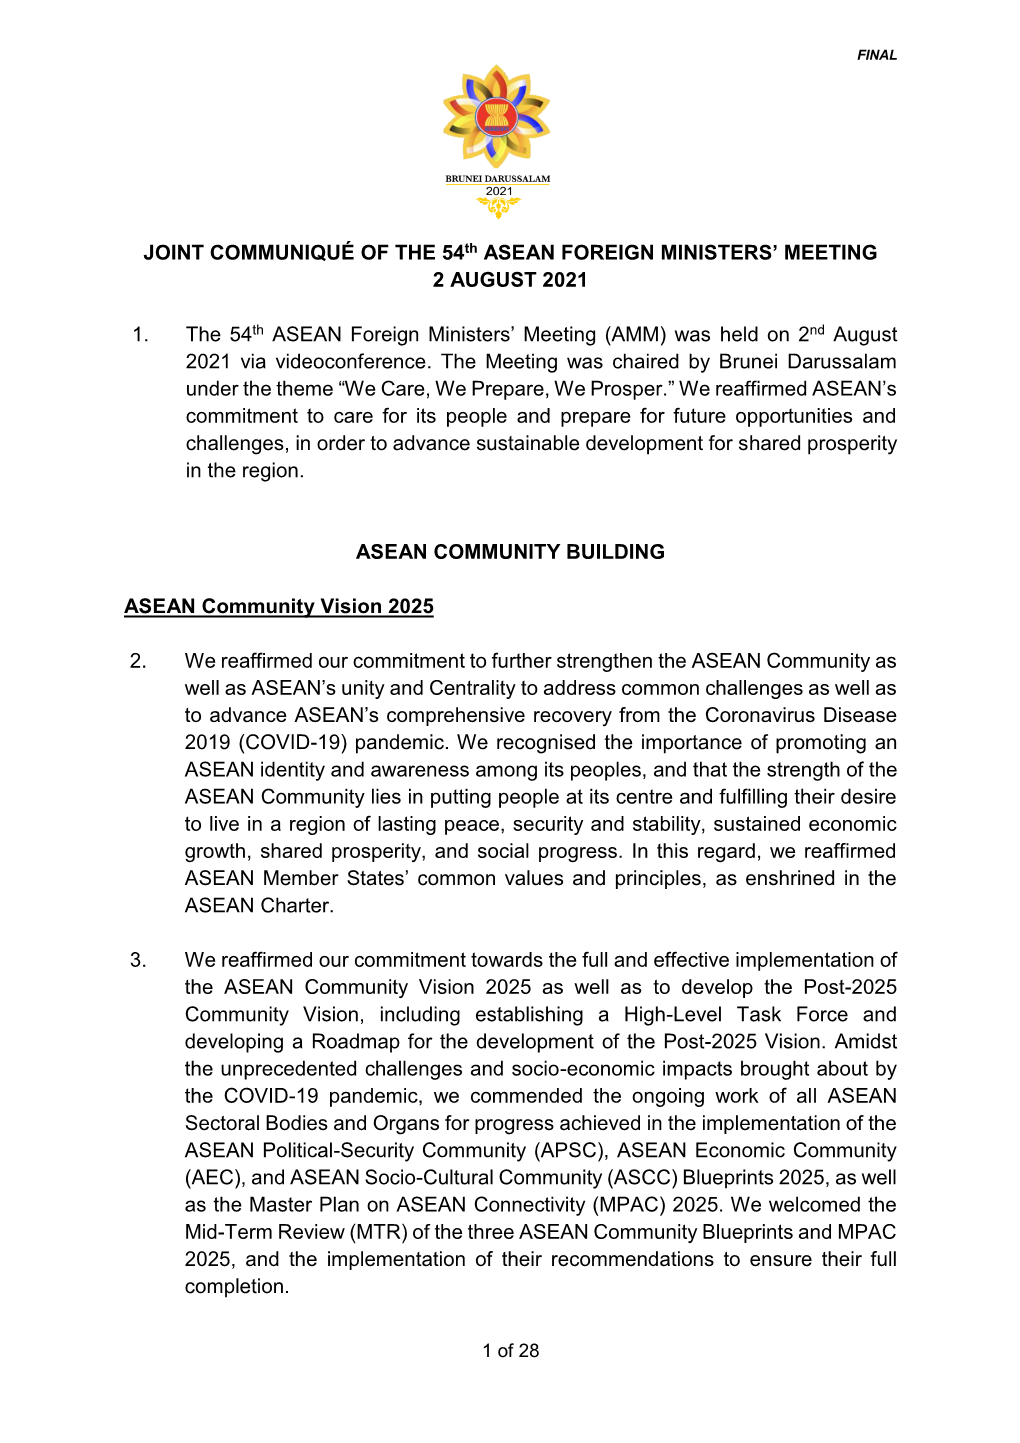 JOINT COMMUNIQUÉ of the 54Th ASEAN FOREIGN MINISTERS’ MEETING 2 AUGUST 2021